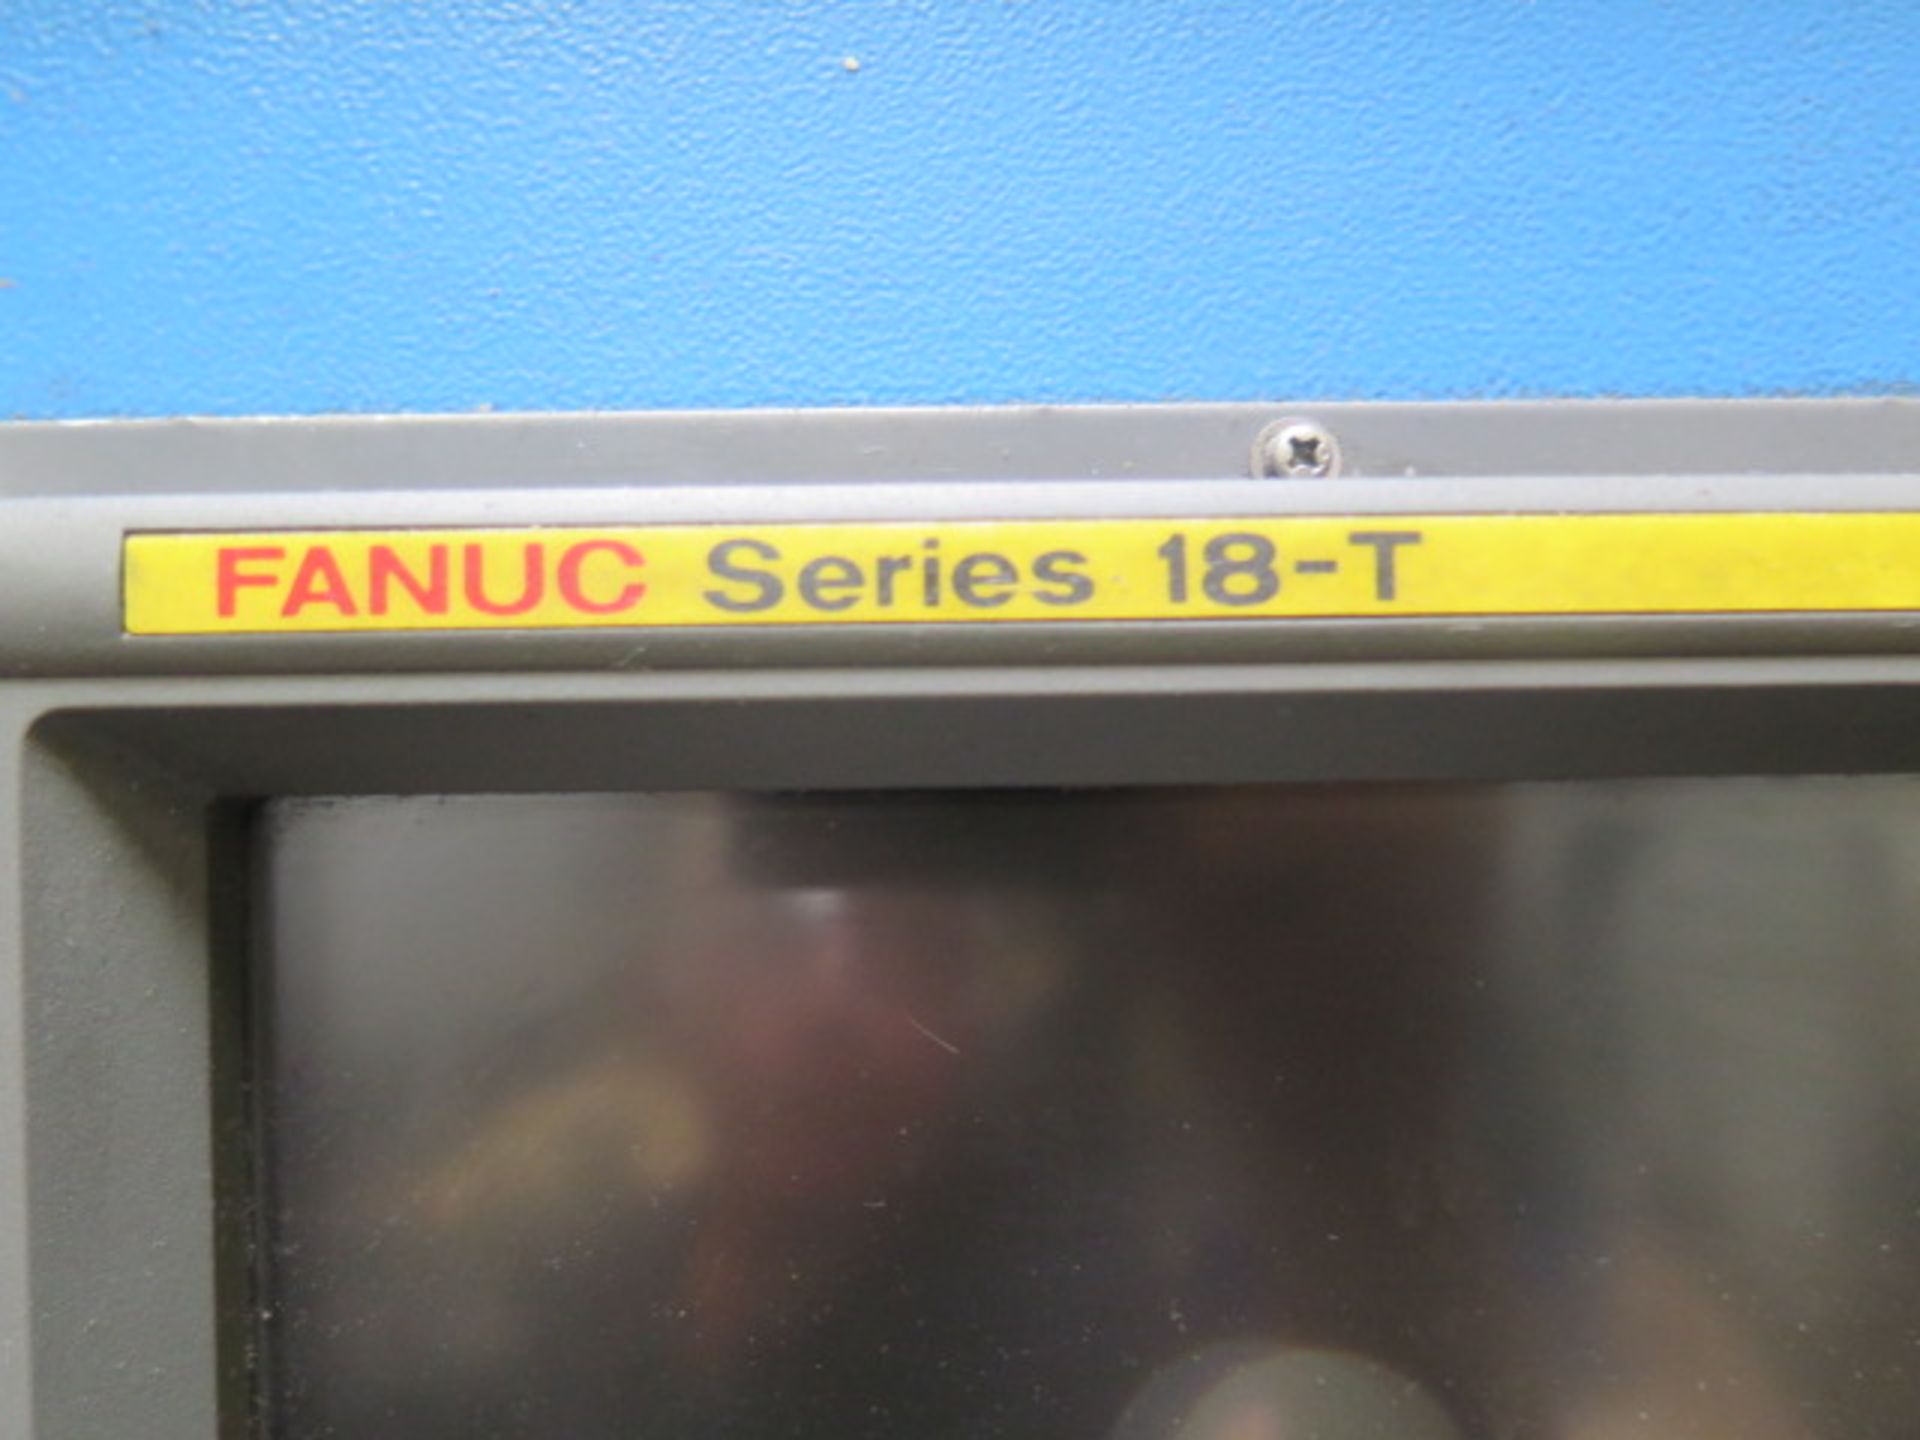 Femco HL-55S CNC Turning Center (TOOLING NOT INCLUDED) w/ Fanuc 18-T Controls, 12-Station,SOLD AS IS - Image 5 of 15